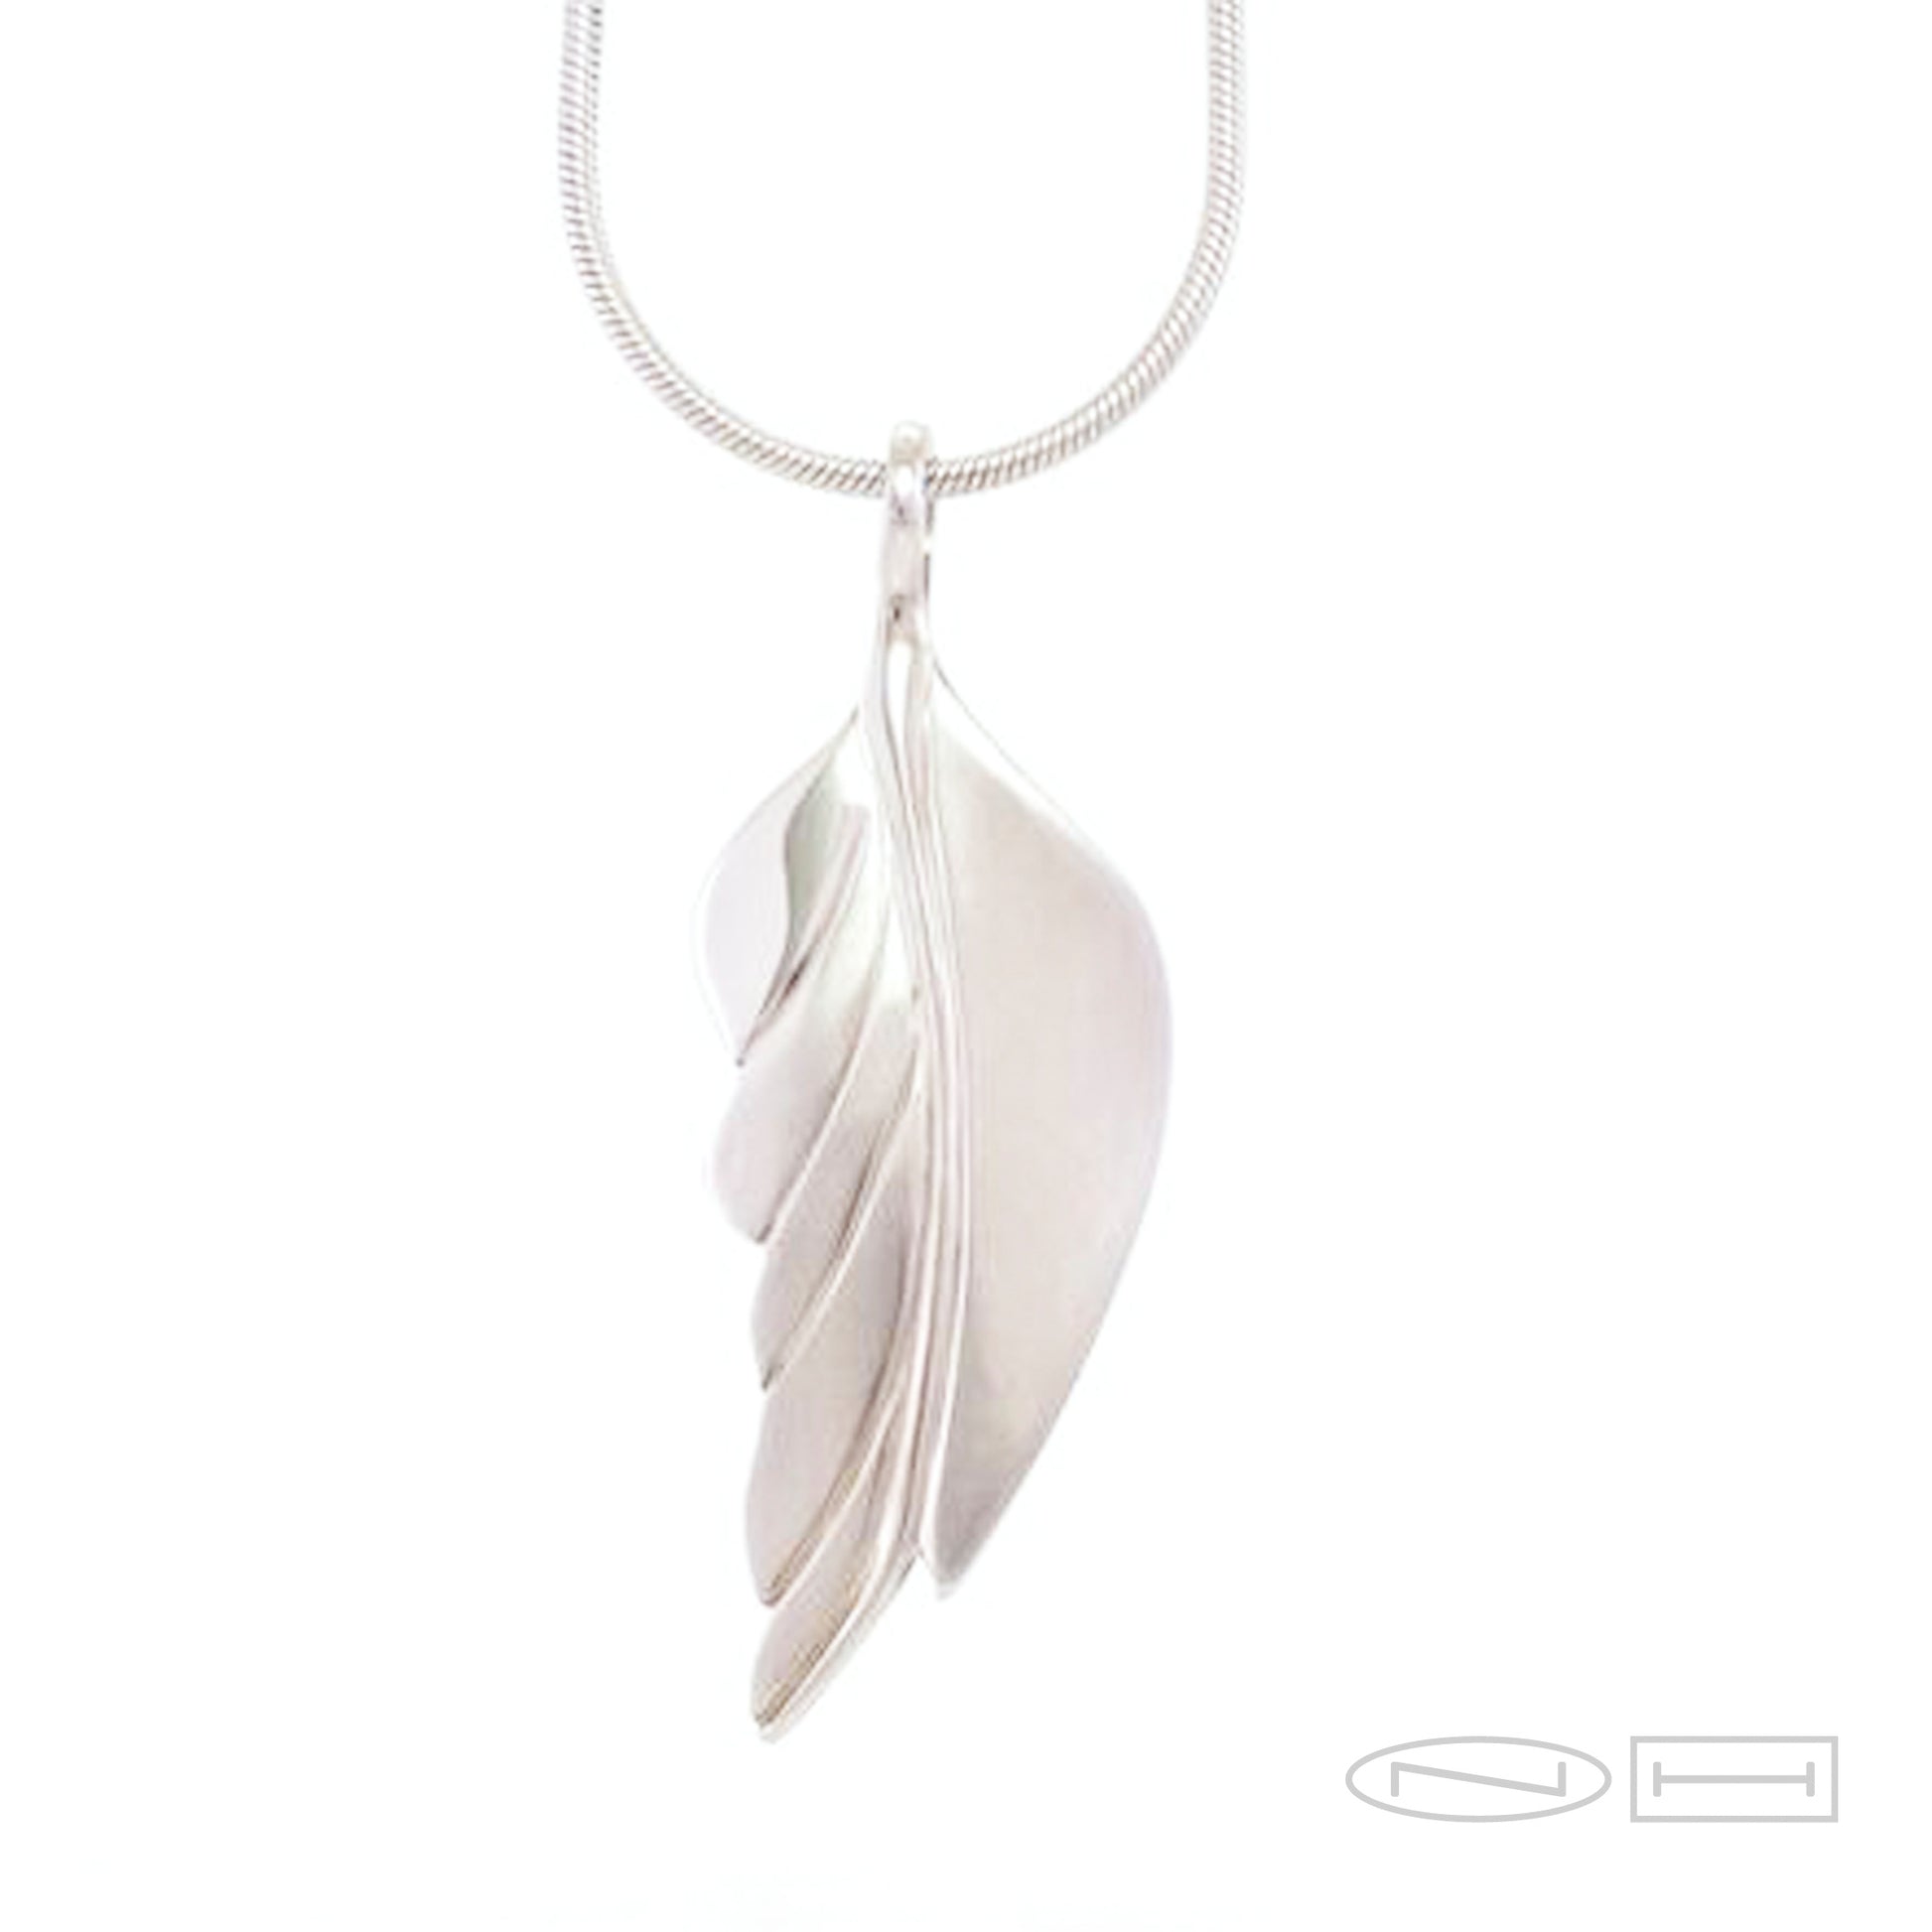 Handmade sterling silver feather pendant by ZEALmetal, Nicole Horlor, iKingston, ON Canada